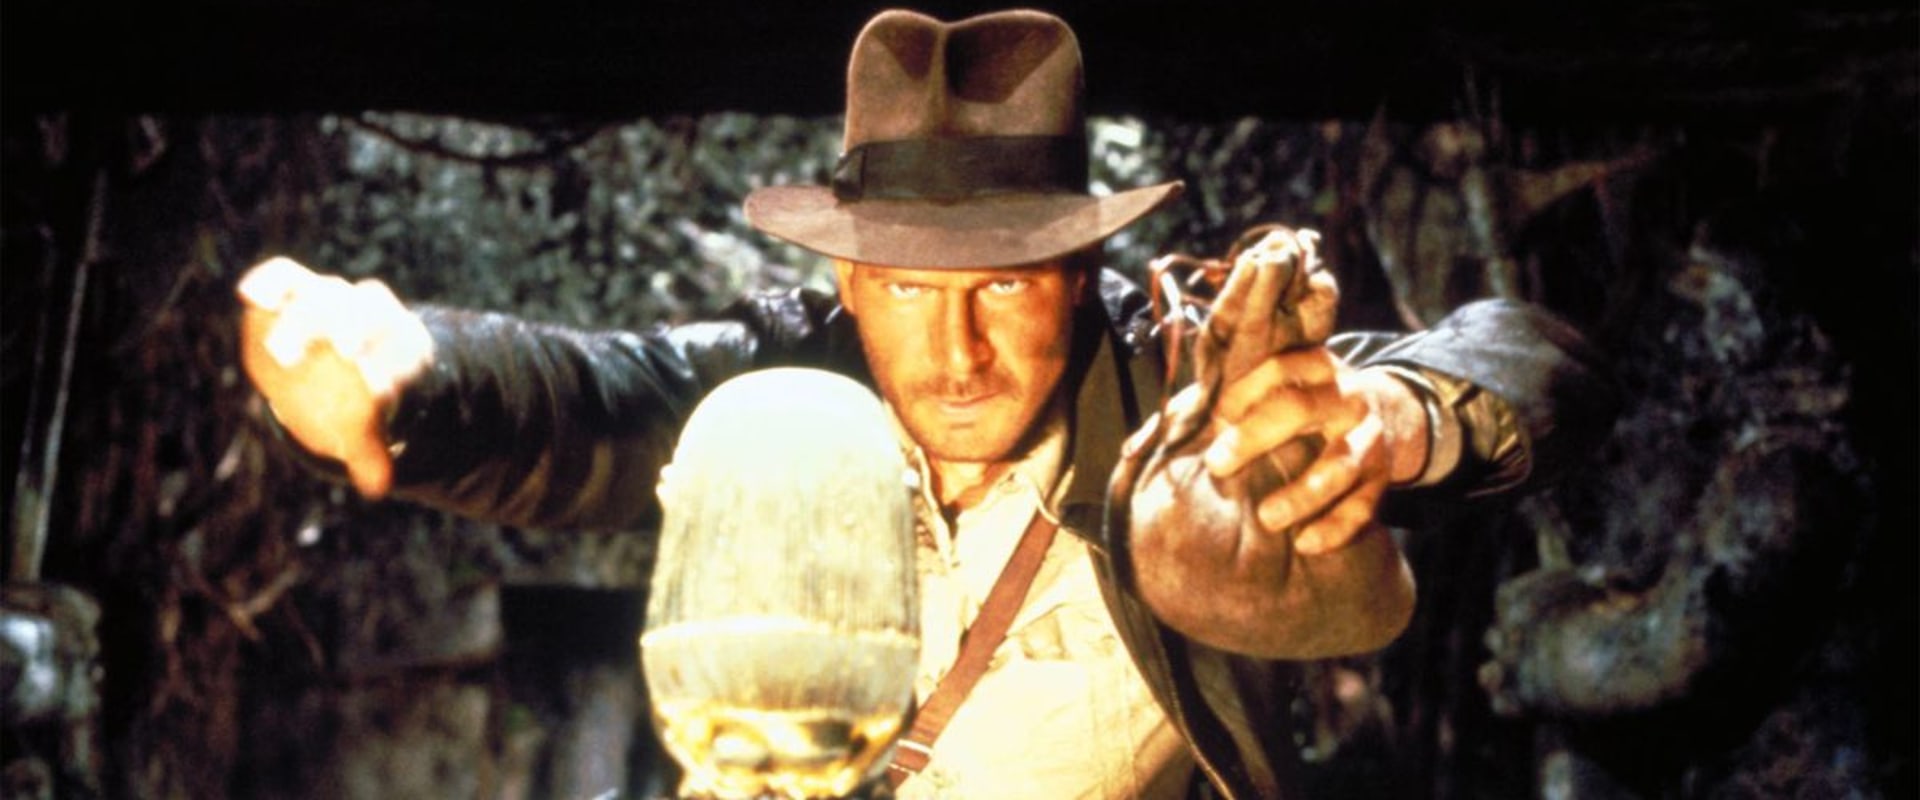 Which indiana jones movie is the best?